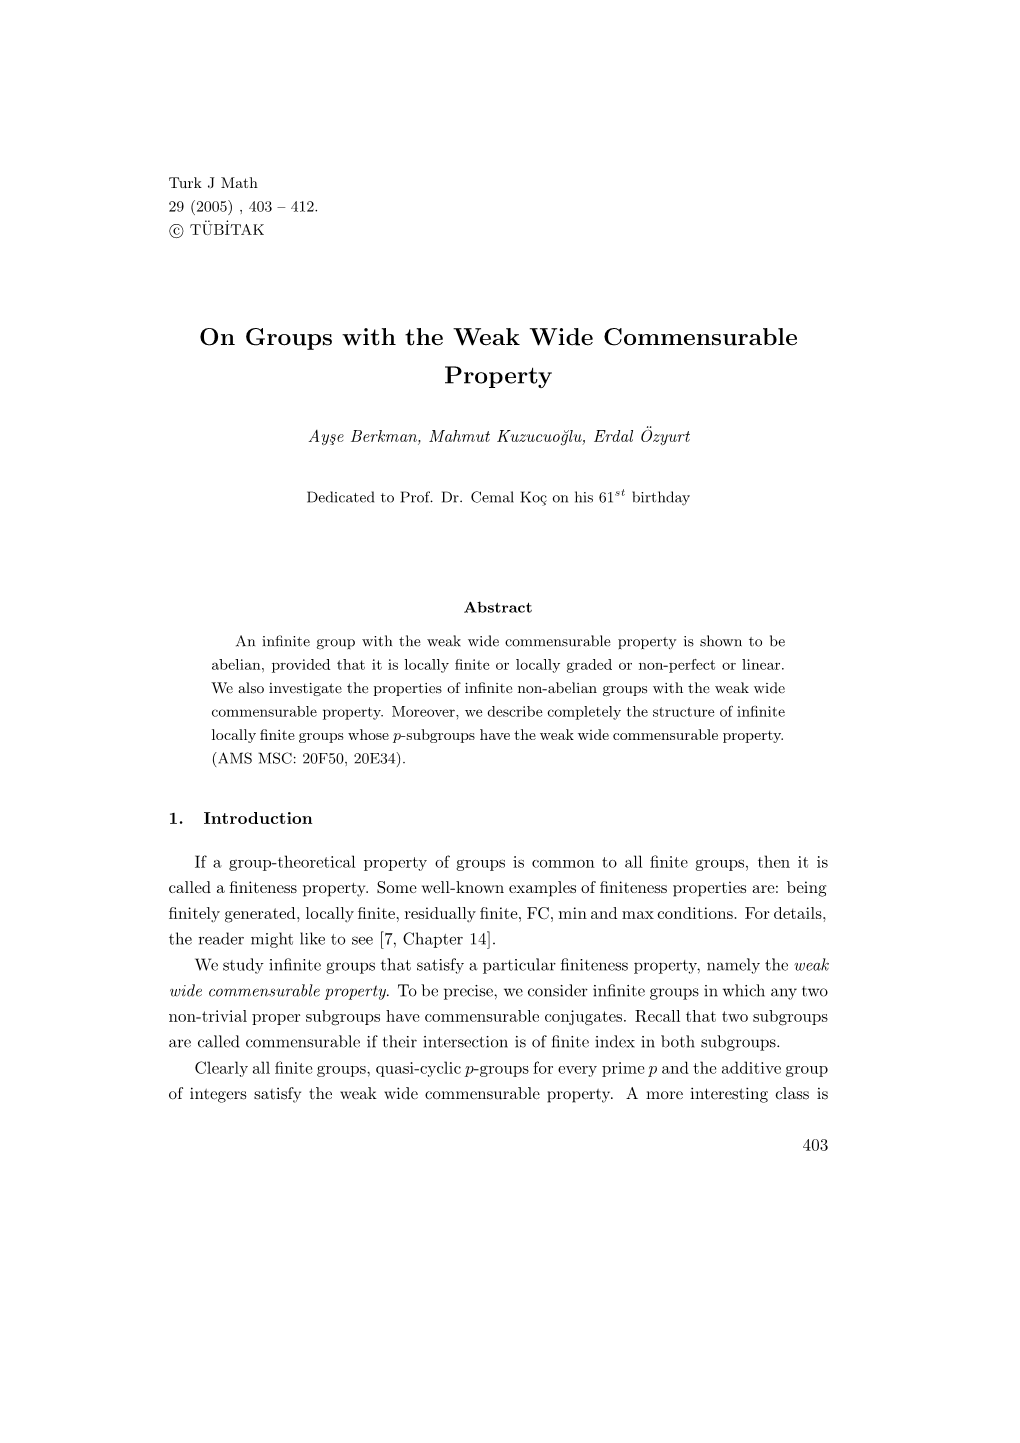 On Groups with the Weak Wide Commensurable Property